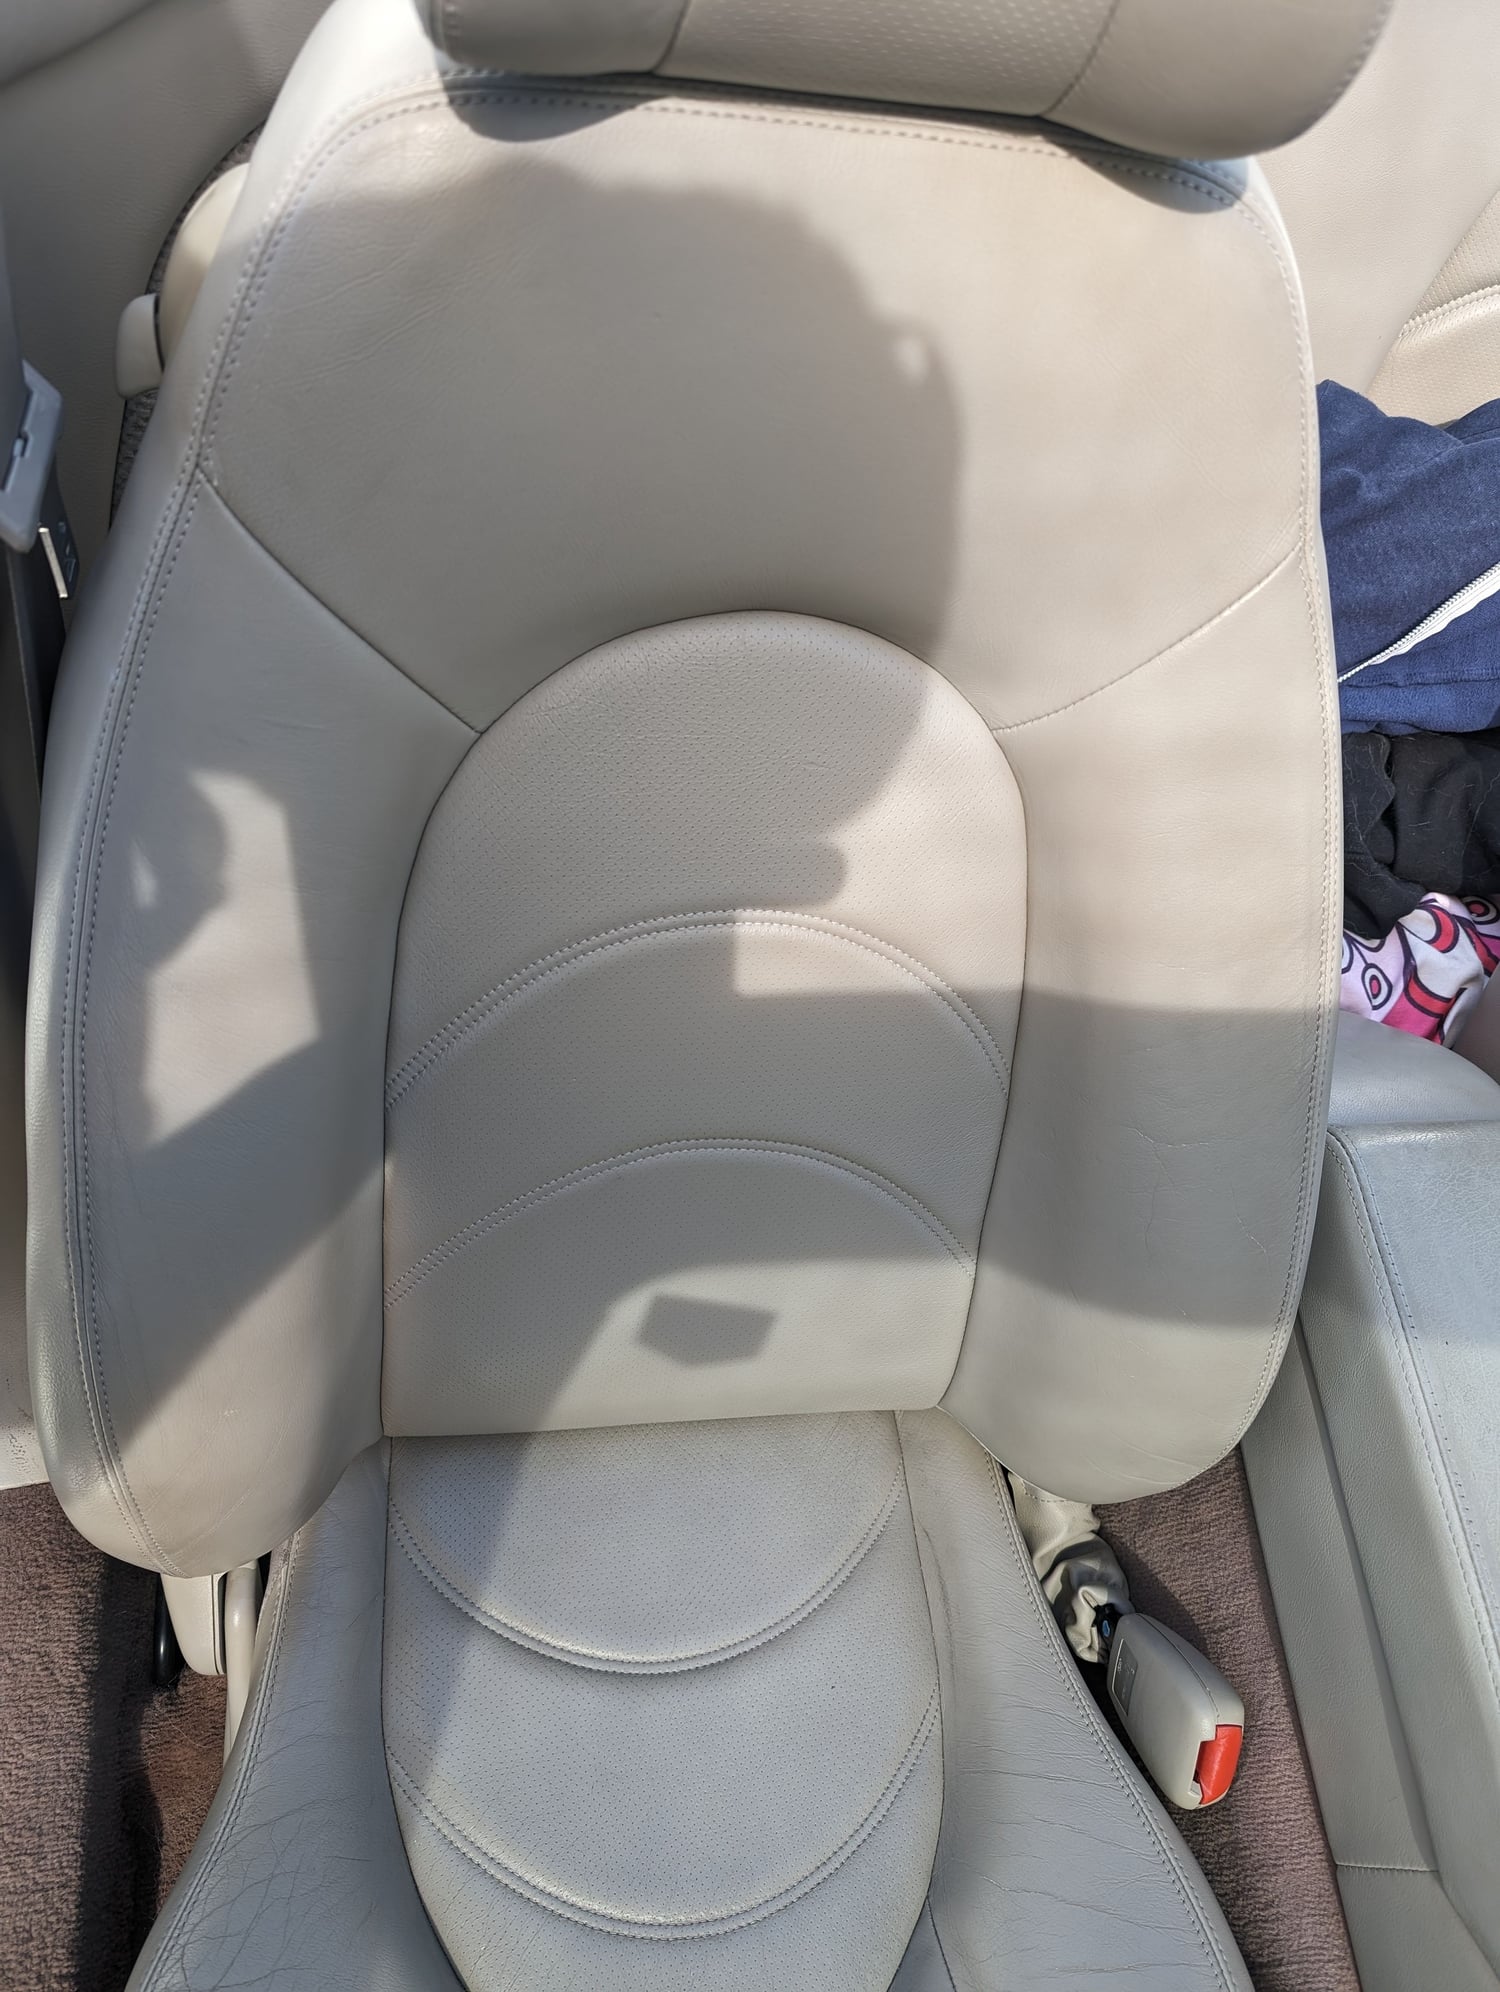 Interior/Upholstery - Right-hand seat upholstry (Oatmeal) in good condition free to good home in UK - Used - 2000 to 2005 Jaguar XKR - Buckinghamshire HP65PN, United Kingdom